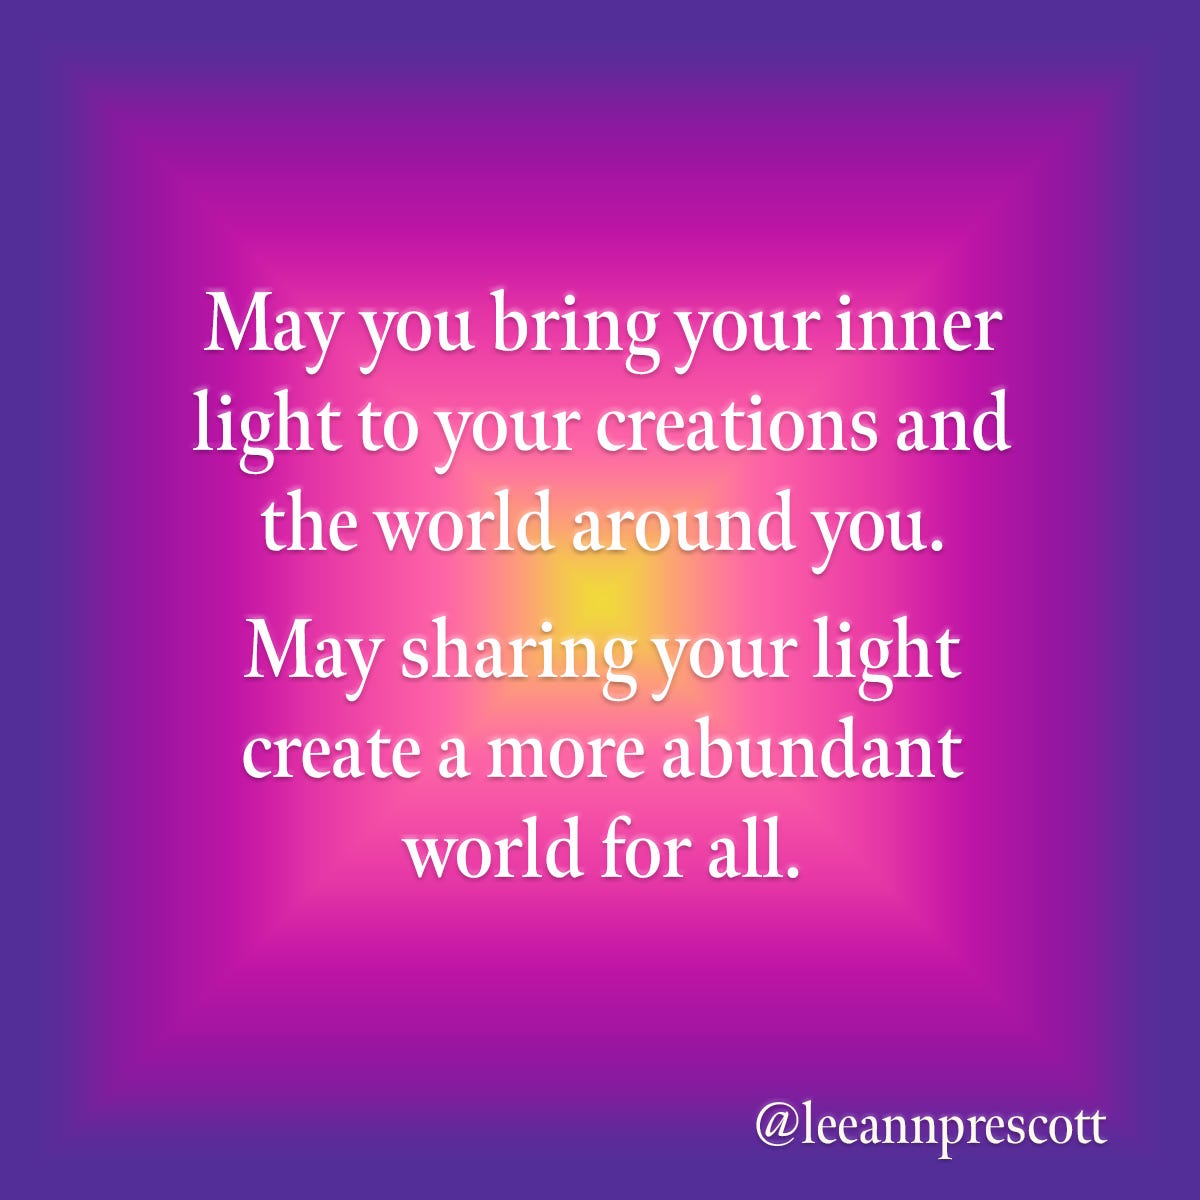 May sharing your light create a more abundant world for all